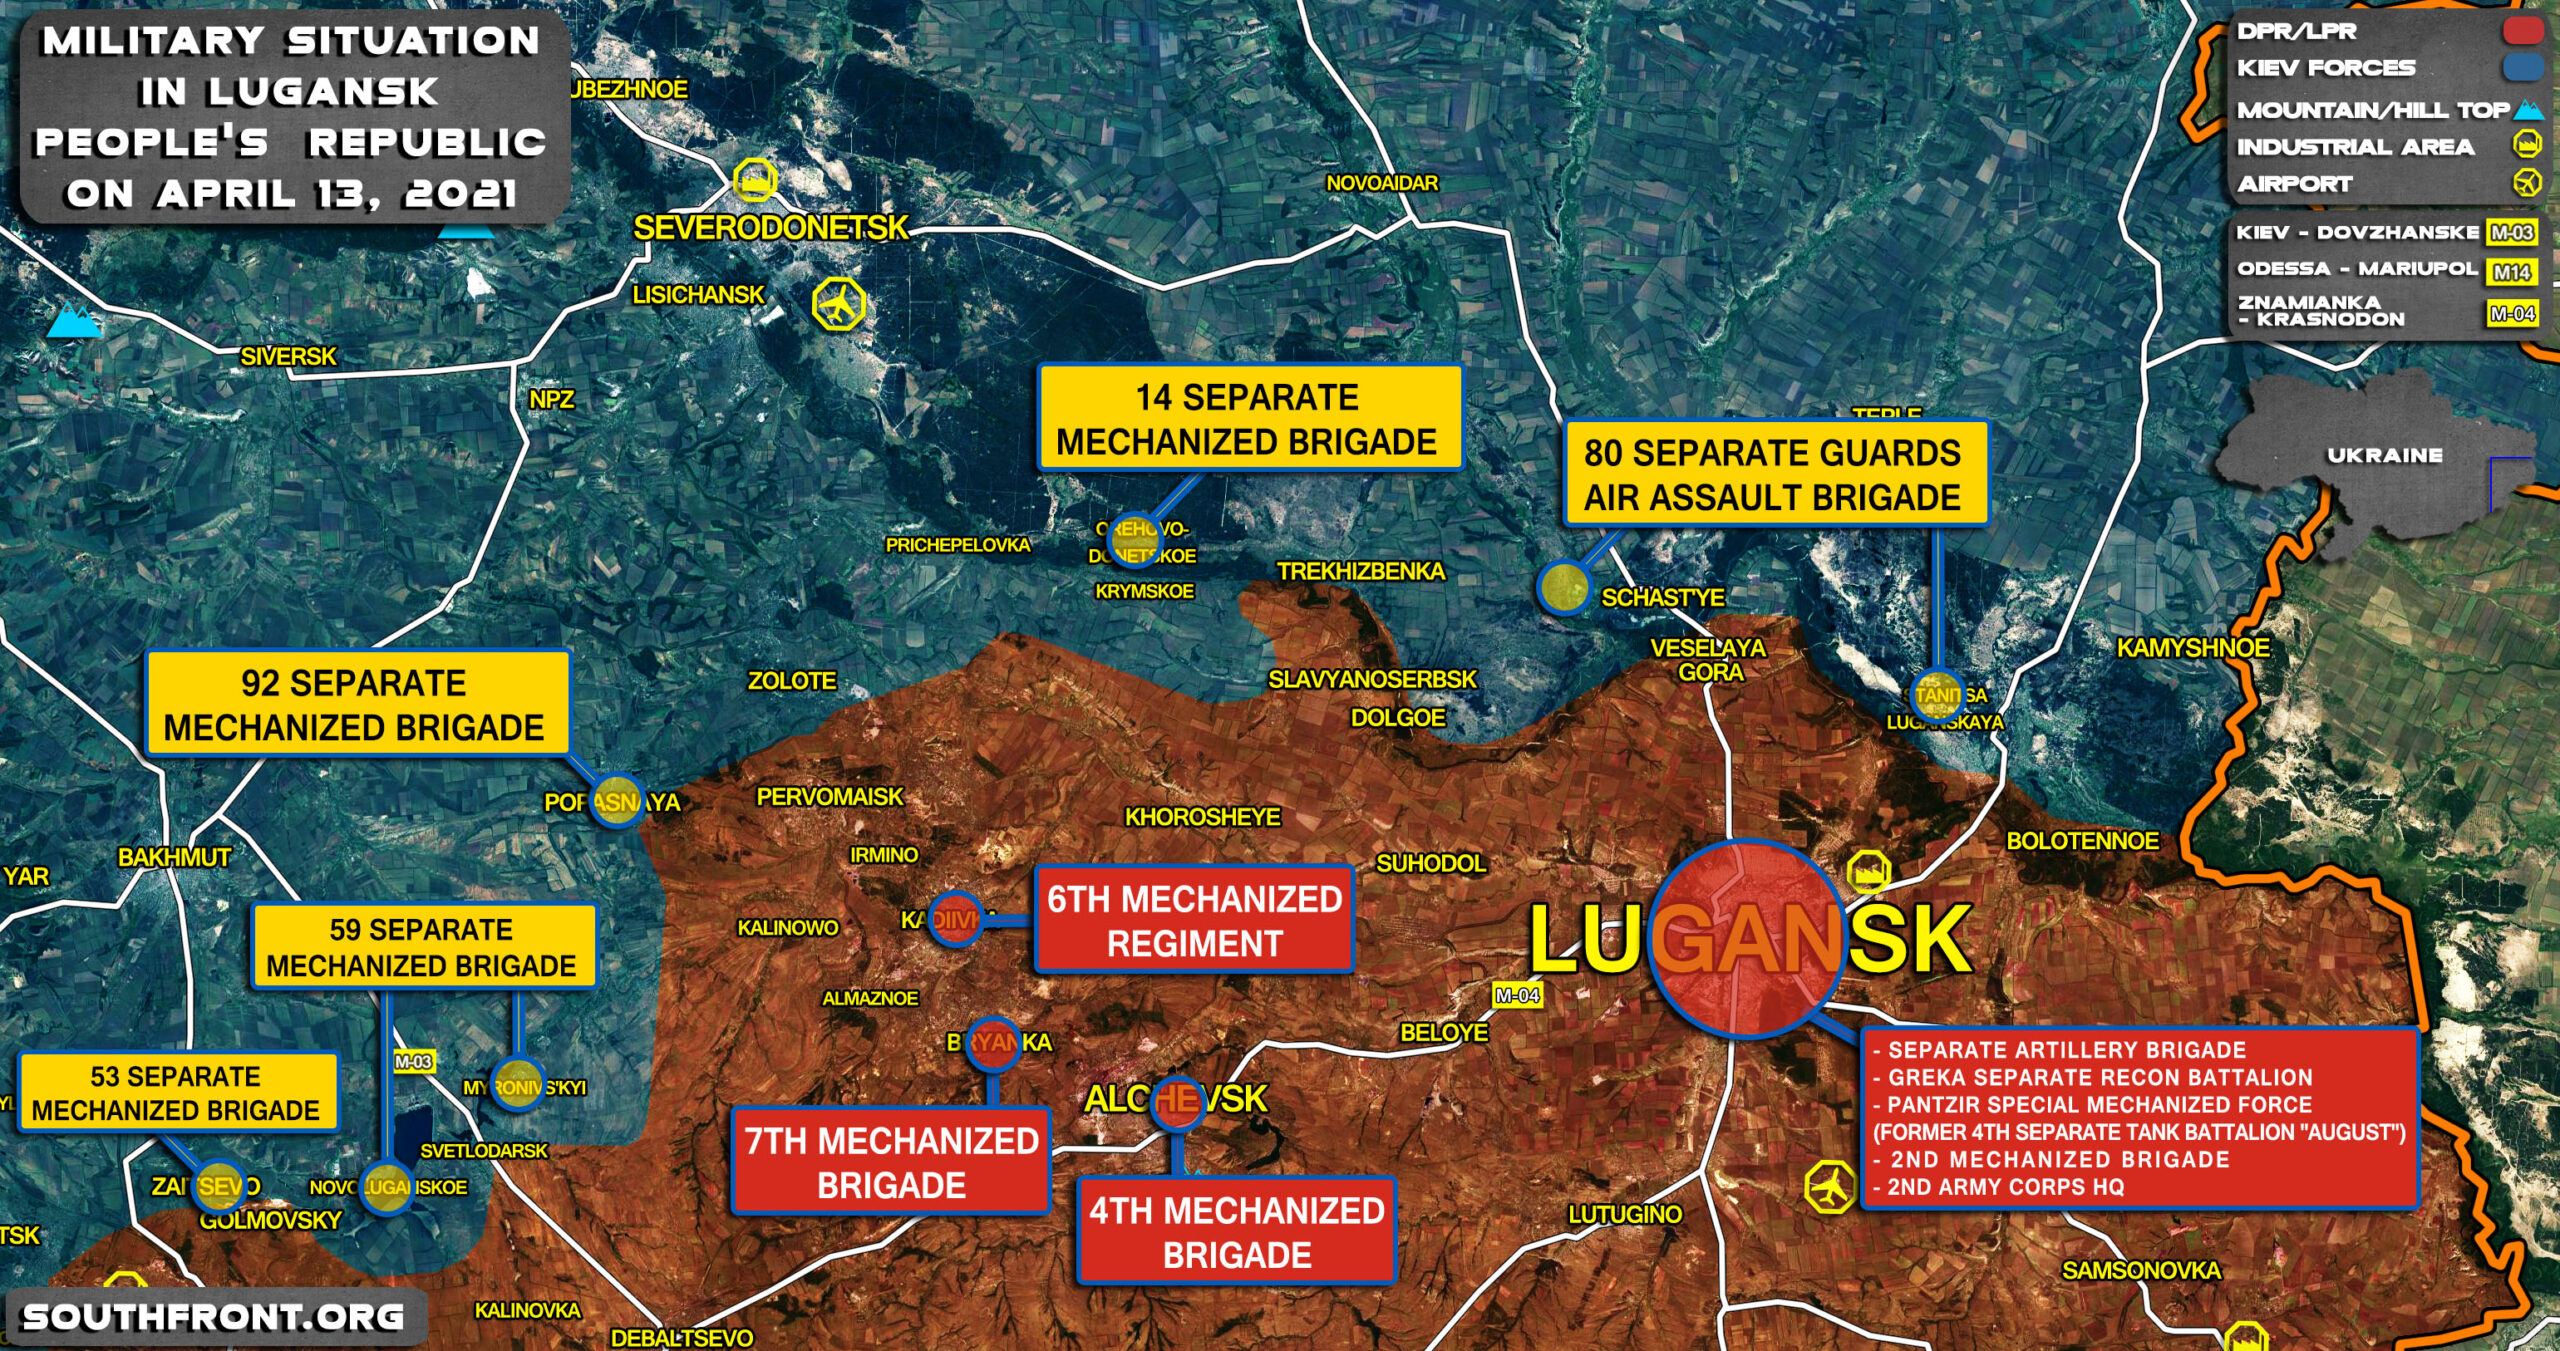 Positions Of Forces Around And In Lugansk People's Republic In Eastern Ukraine (Map Update)